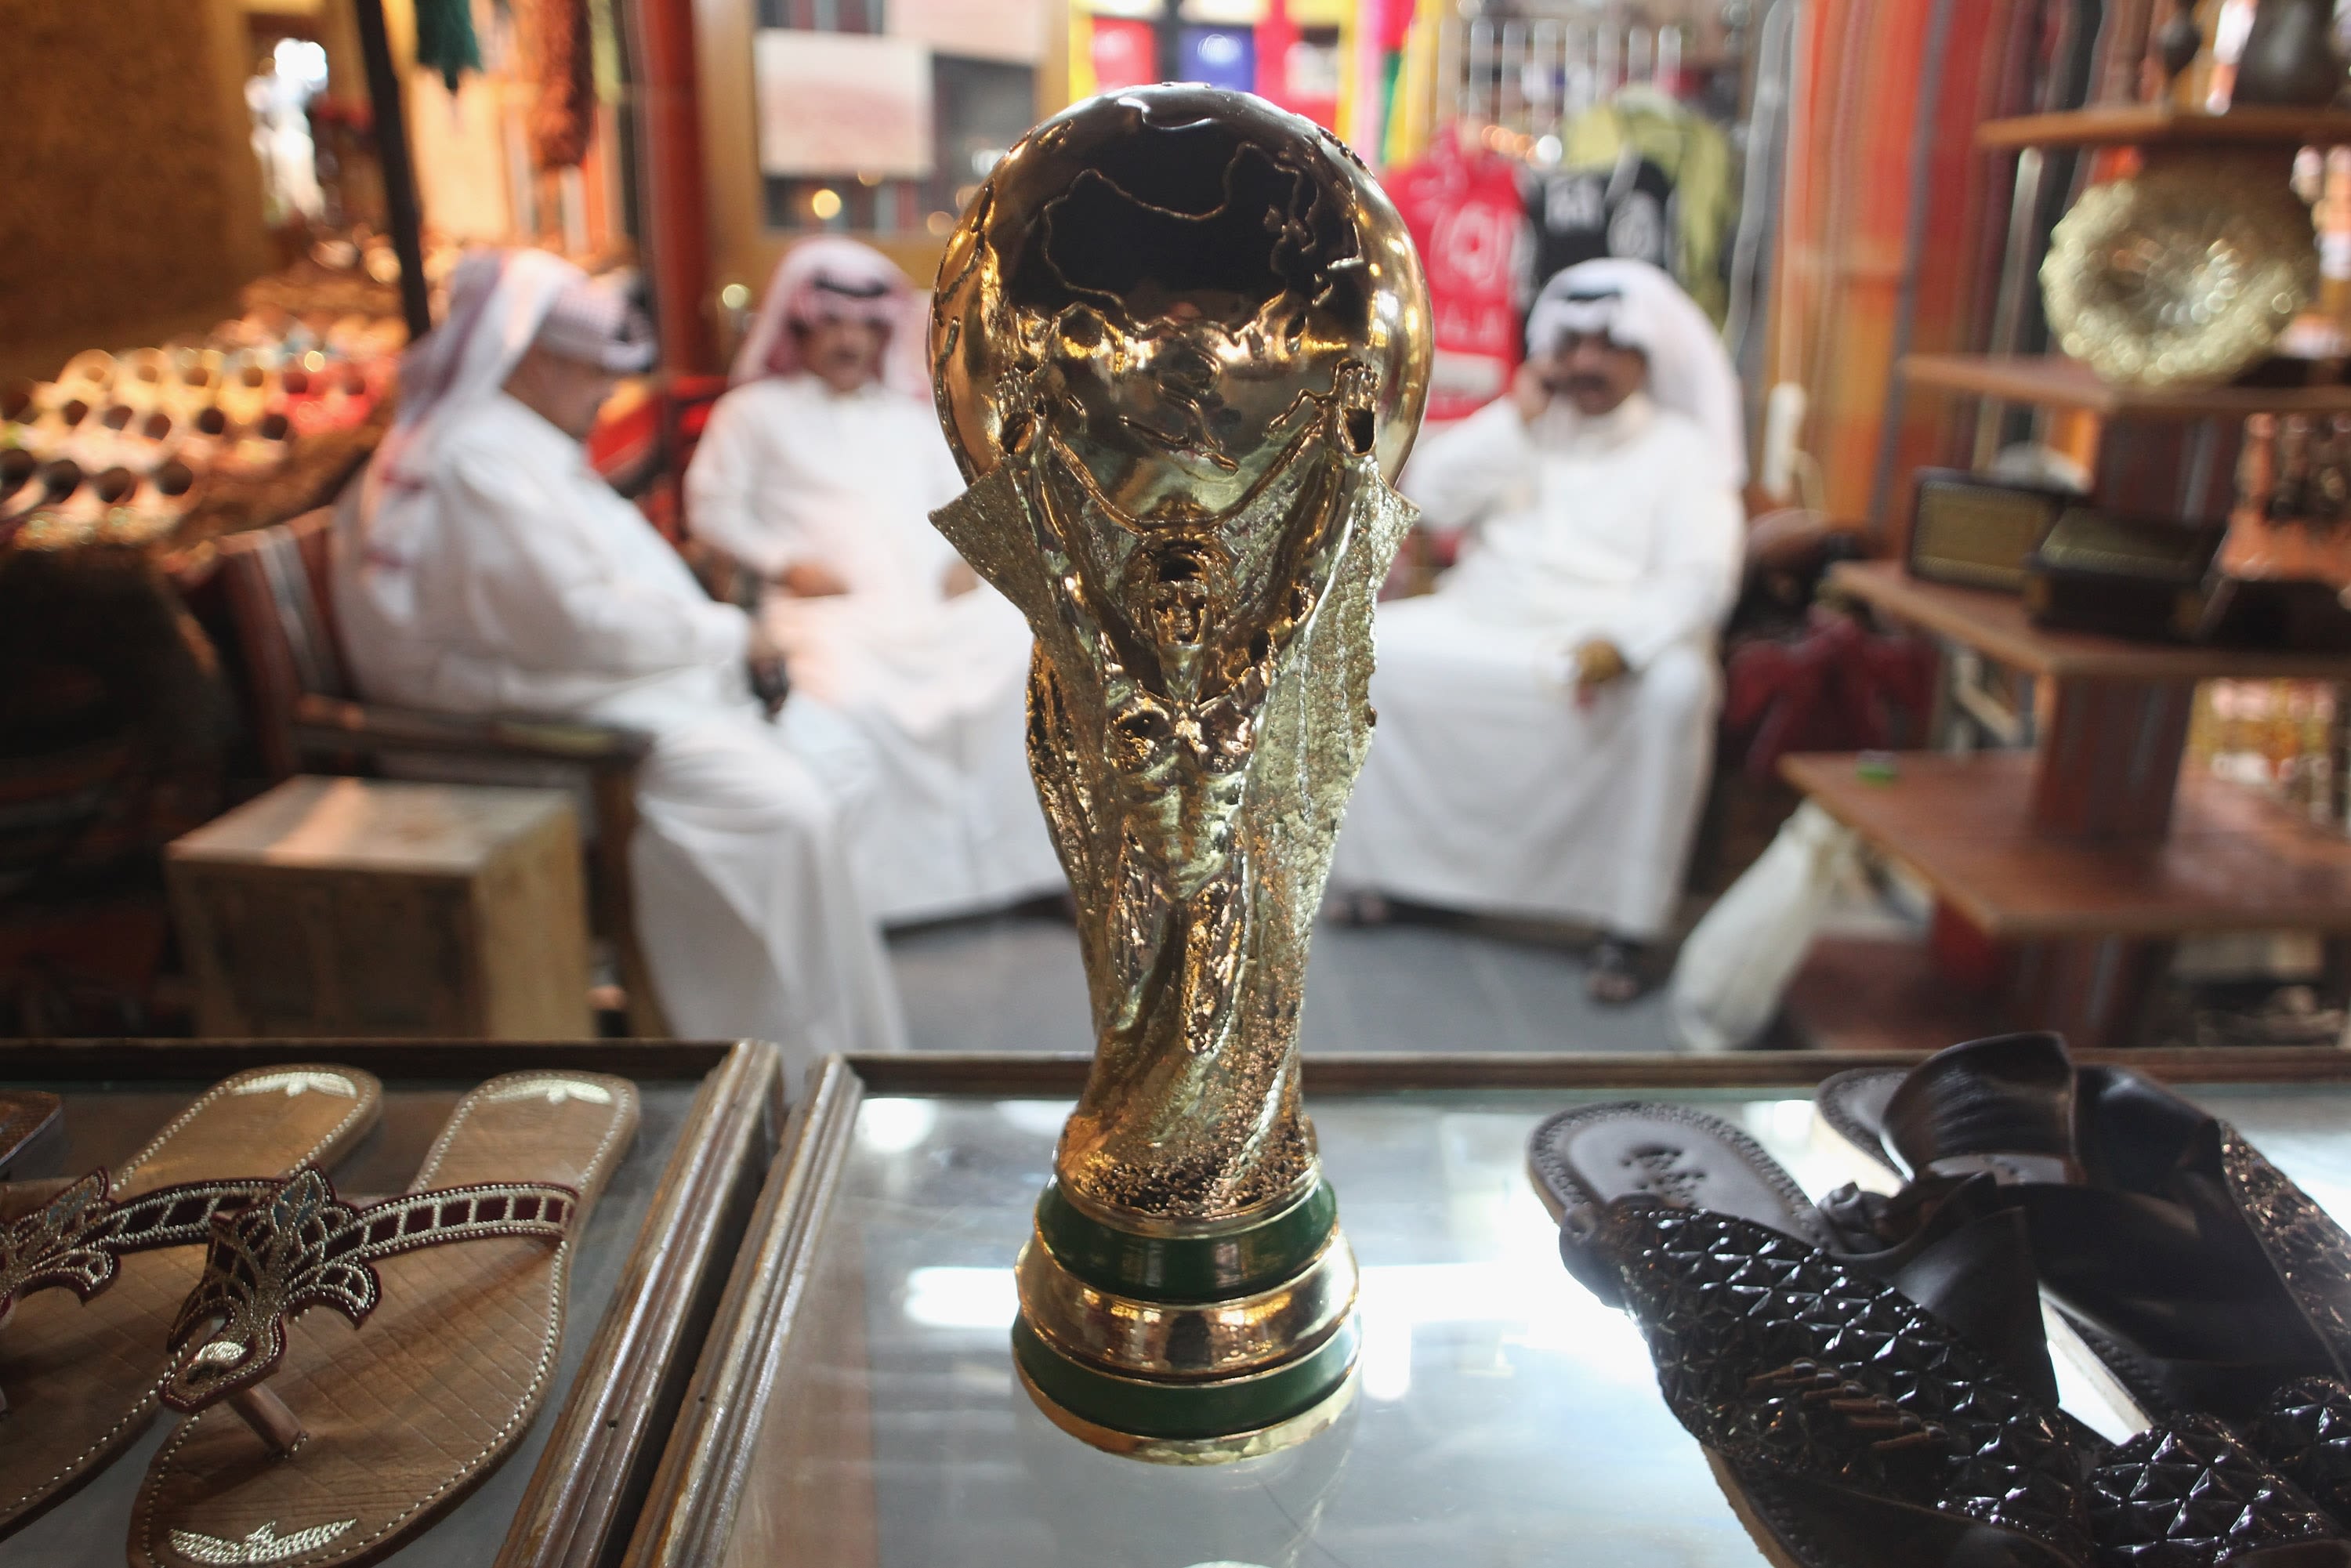 Did Qatar buy the 2022 World Cup? Sunday Times investigates